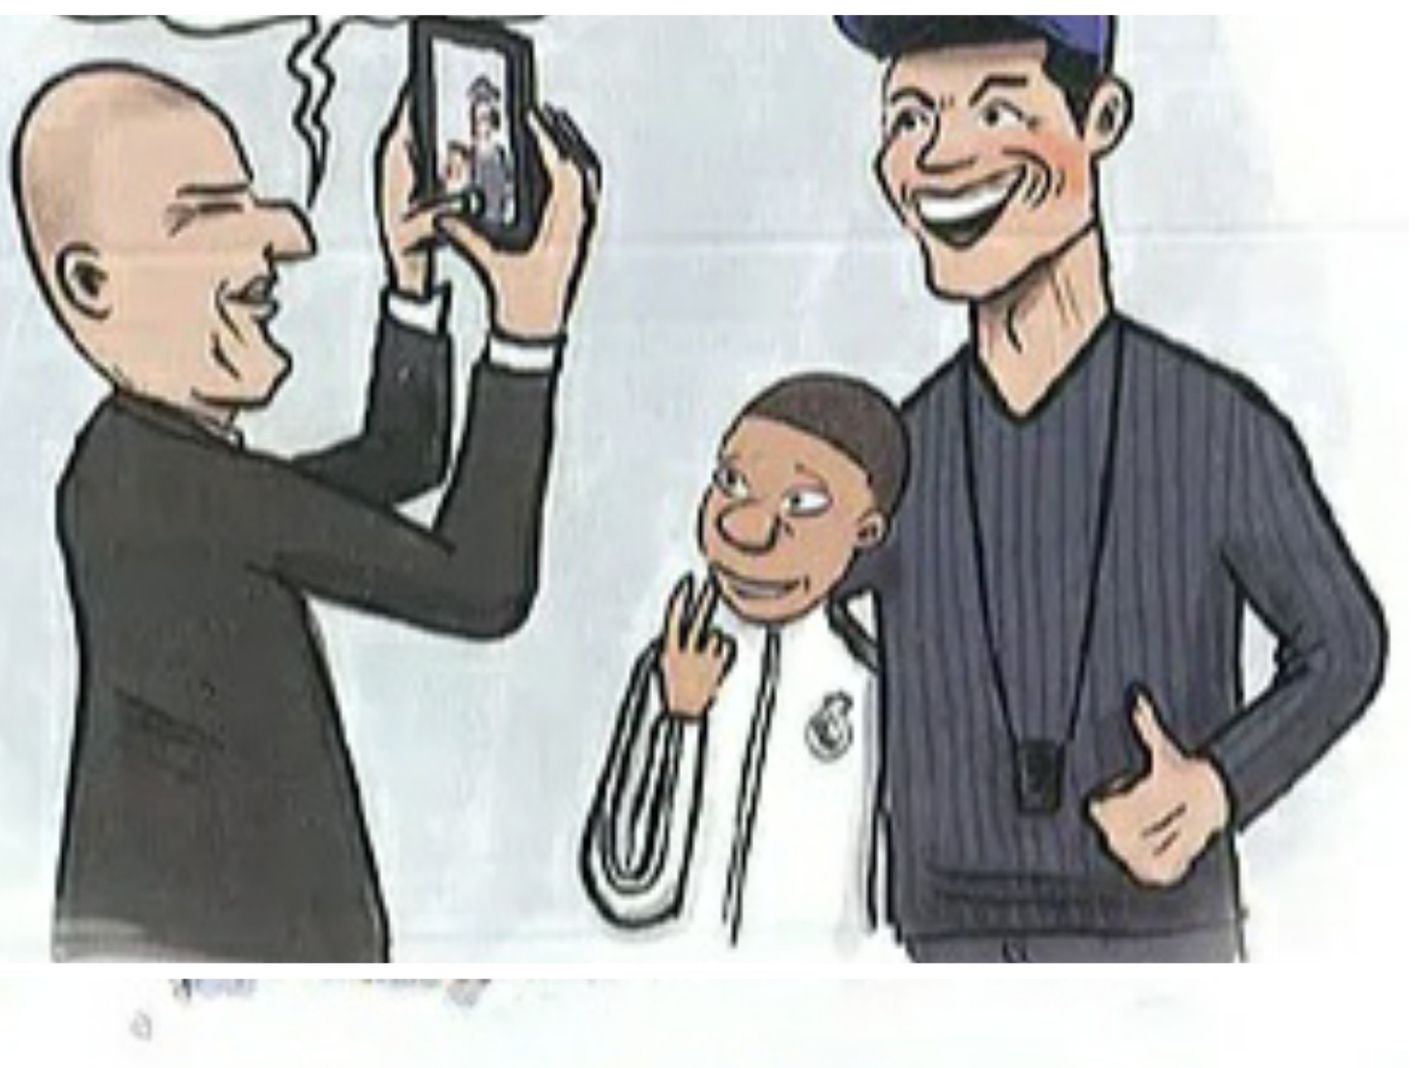 Zidane taking photo of CR7 and Mbappe as seen in Mbappe's comic book